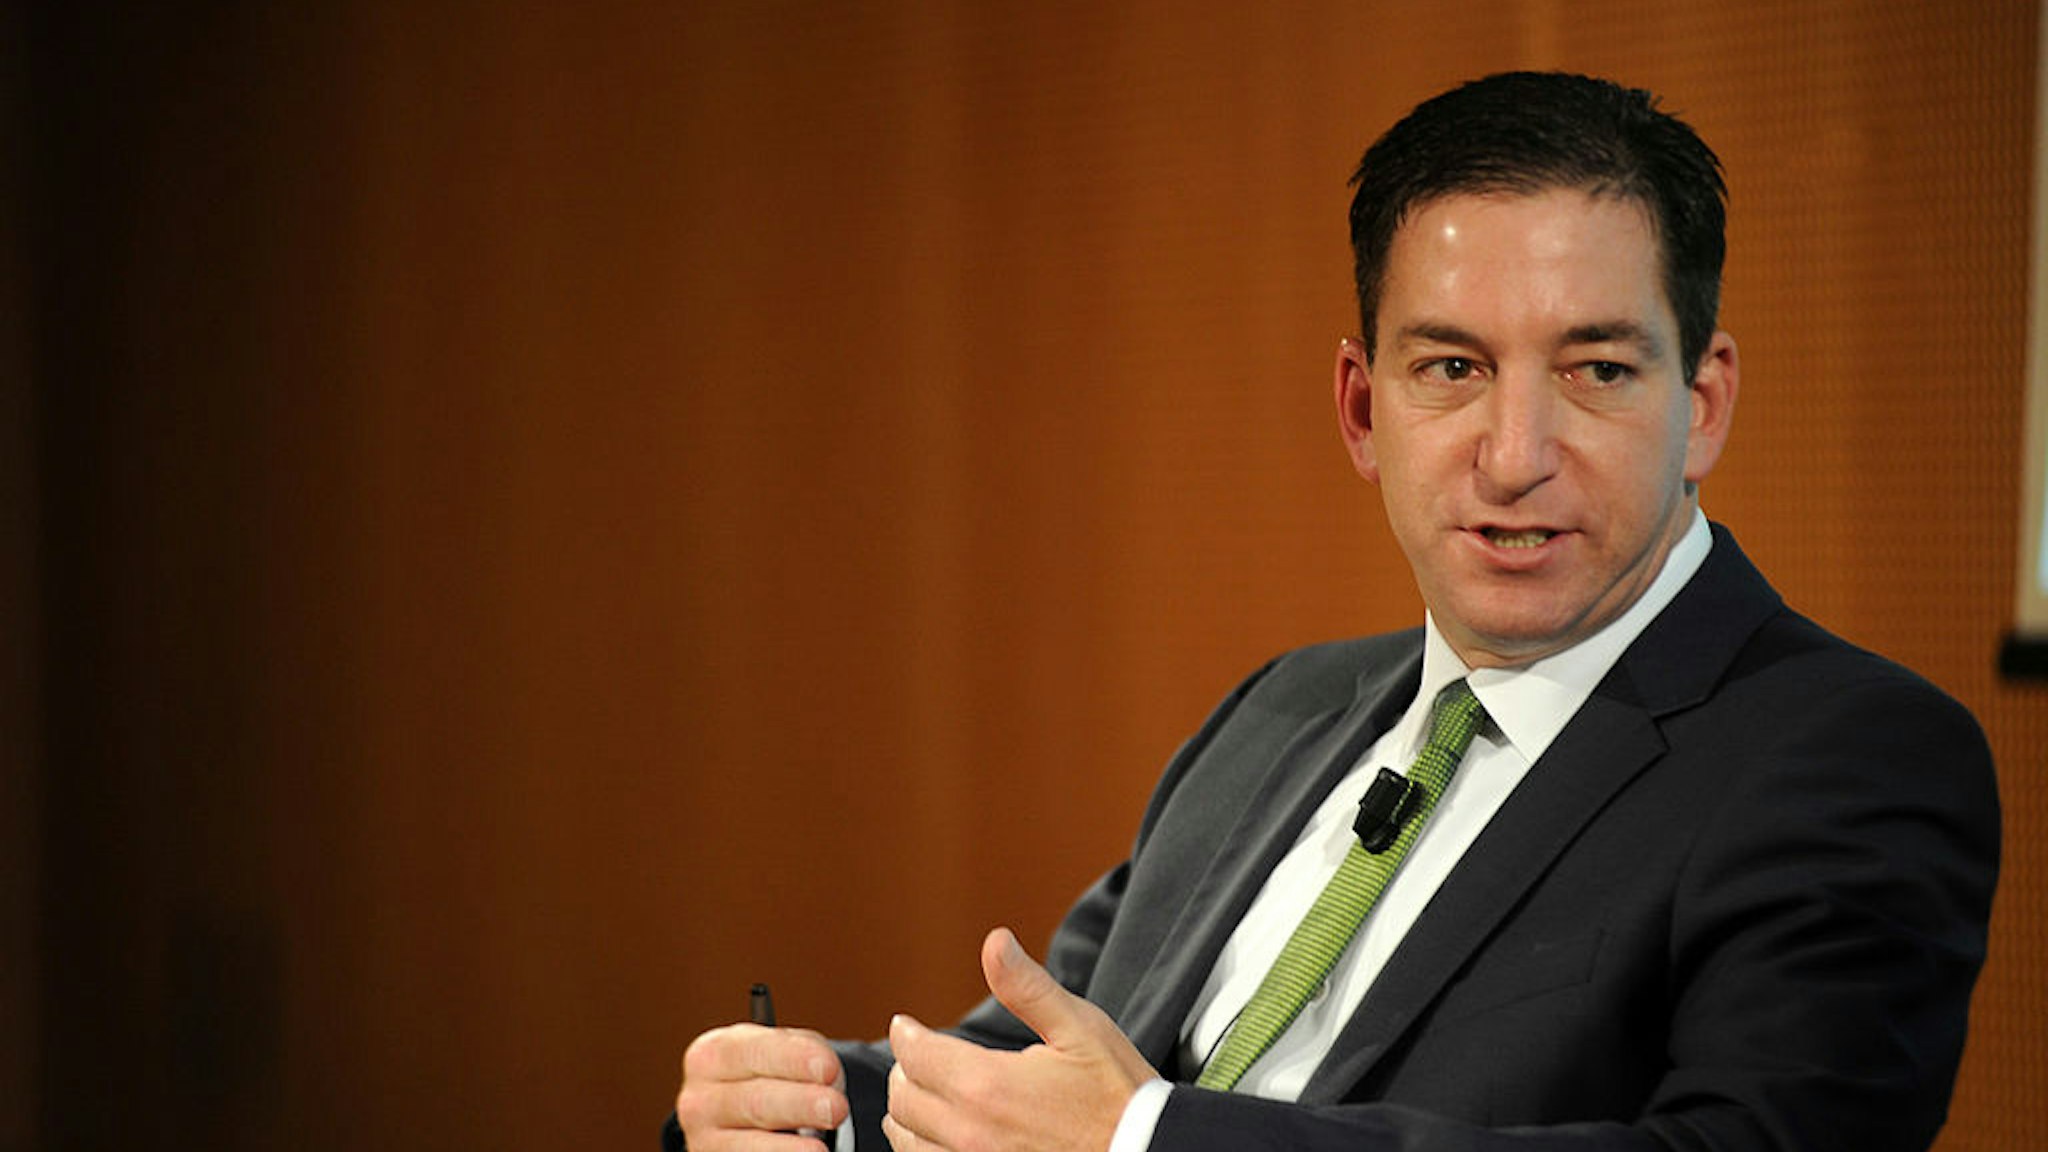 Glenn Greenwald speaks during the presentation of his book 'No Place to Hide: Edward Snowden, The NSA, And The U.S. Surveillance State' on May 26, 2014 in Milan, Italy.